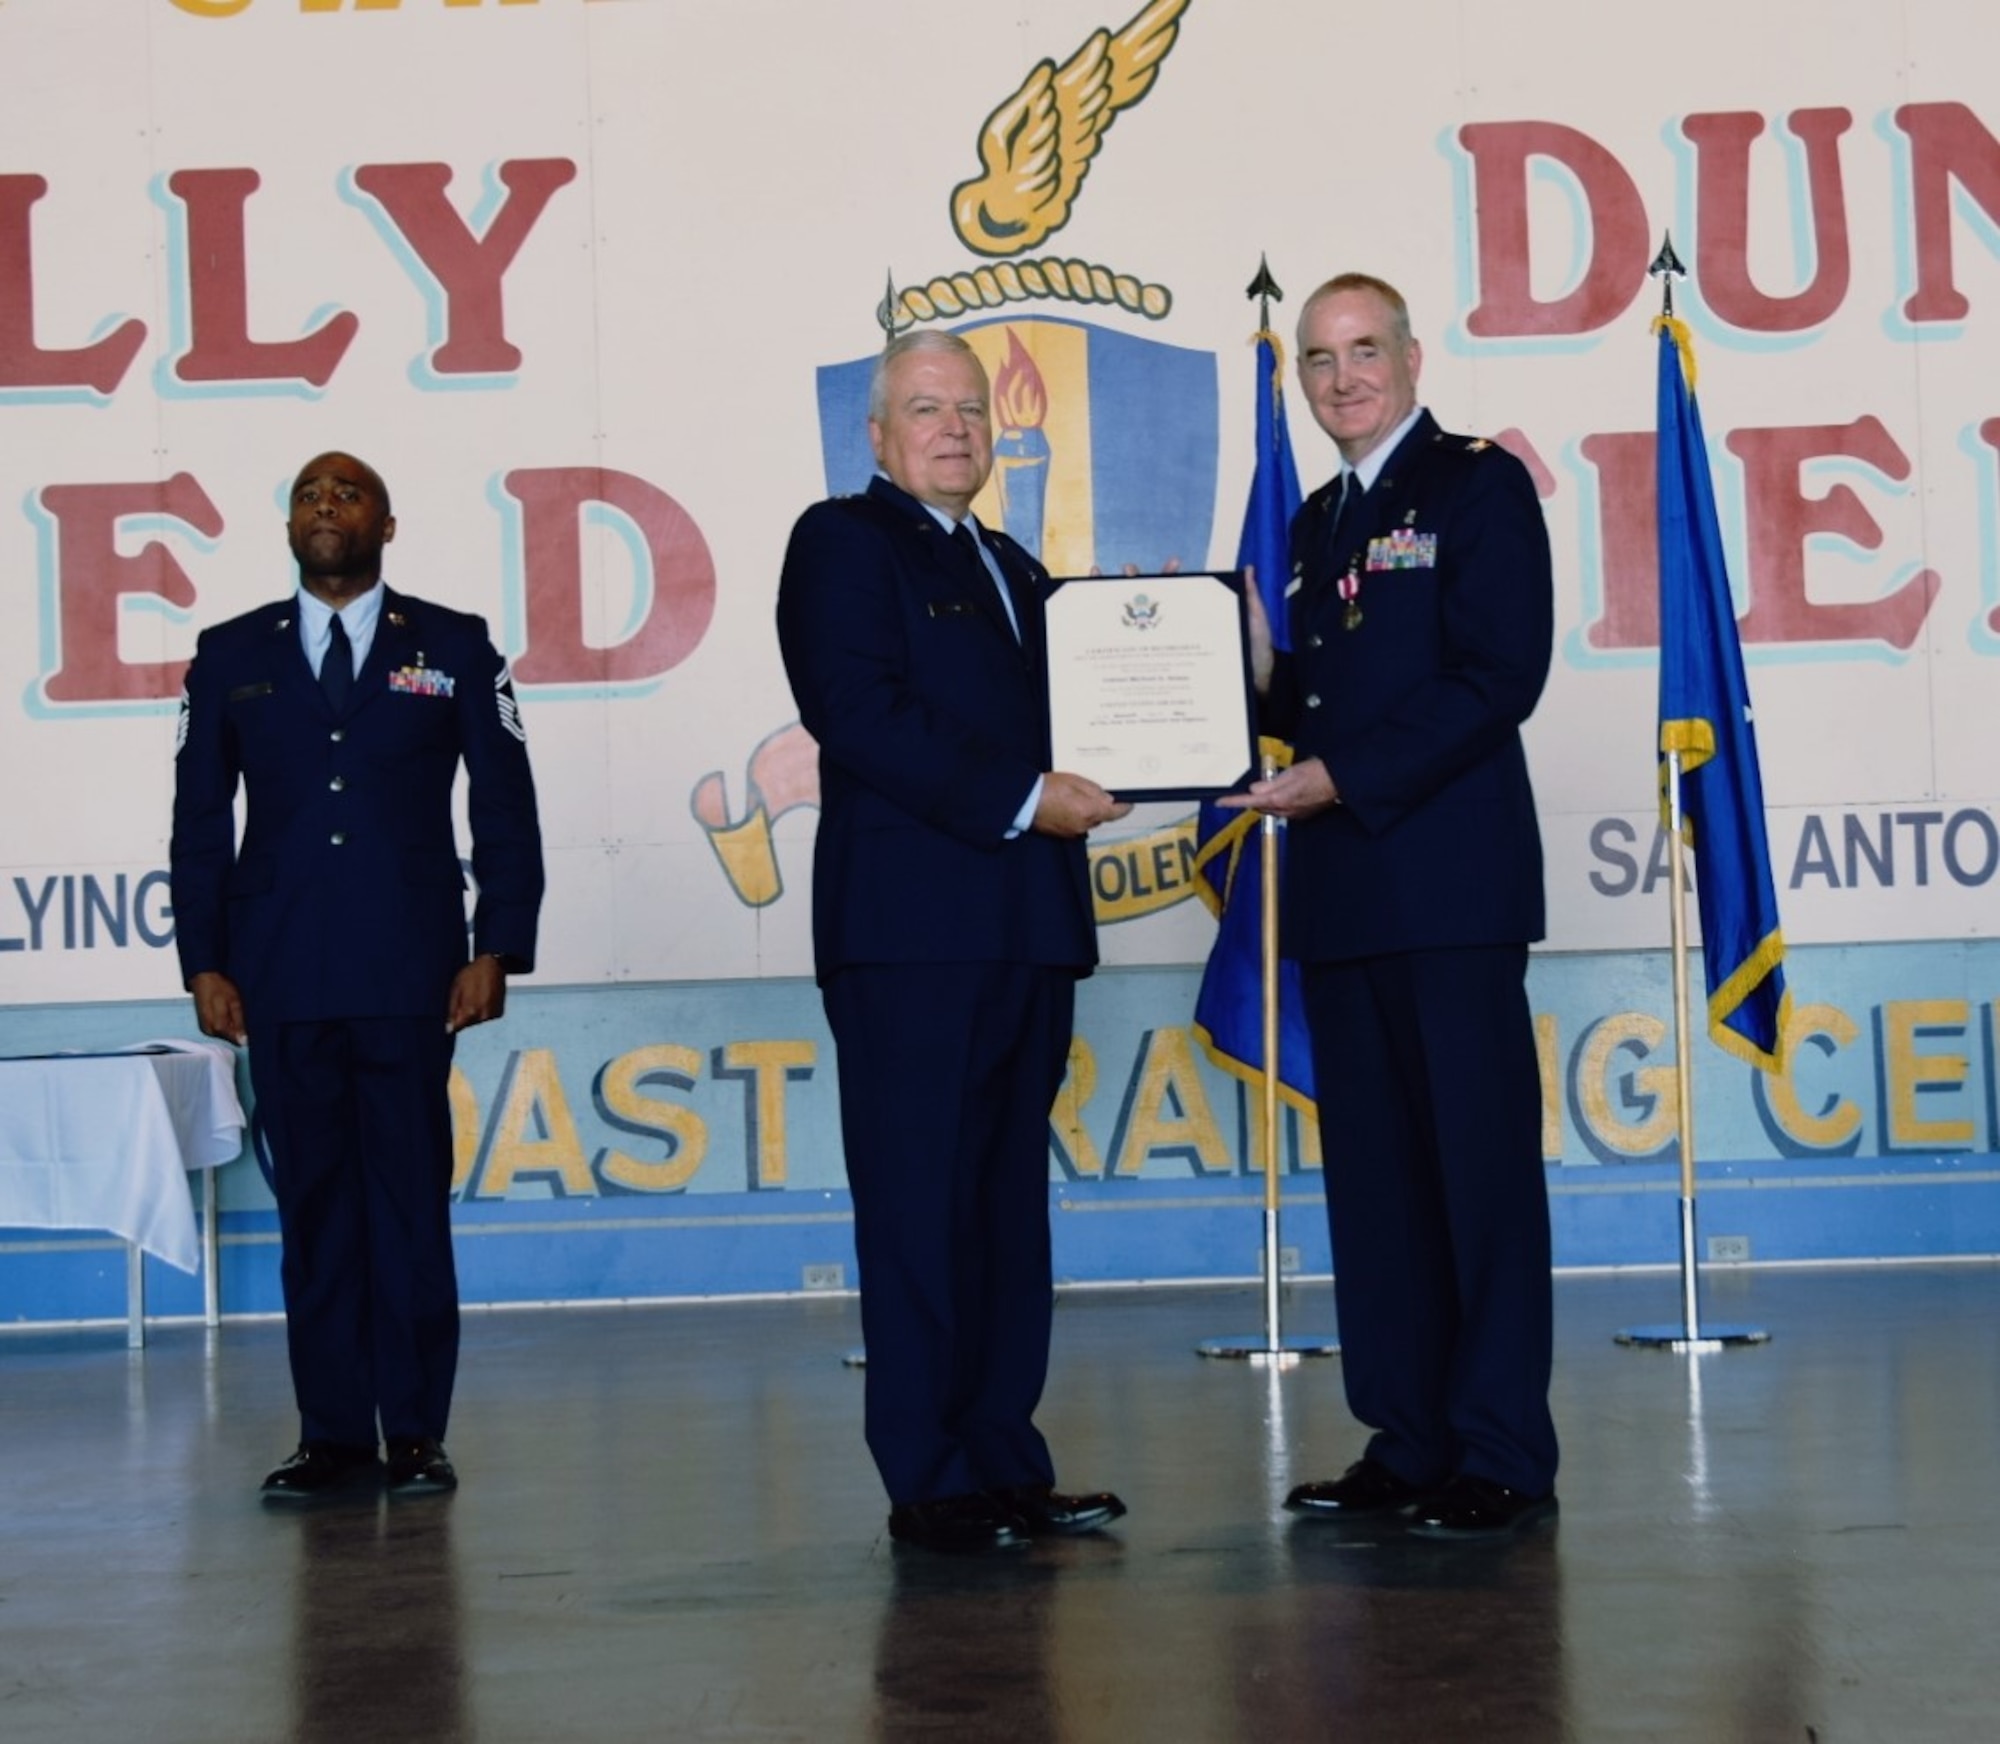 Brig. Gen. John C. Fobian (Ret.), a former 433rd Airlift Wing commander, presents Col. Michael D. Nelson(right), 433rd Medical Squadron commander, the certificate of retirement in a ceremony May 5, 2018 at Joint Base San Antonio, Texas. Nelson’s career in the United States Air Force began as an enlisted member in January 1987. (U.S. Air Force photo by Tech. Sgt. Carlos J. Trevino)